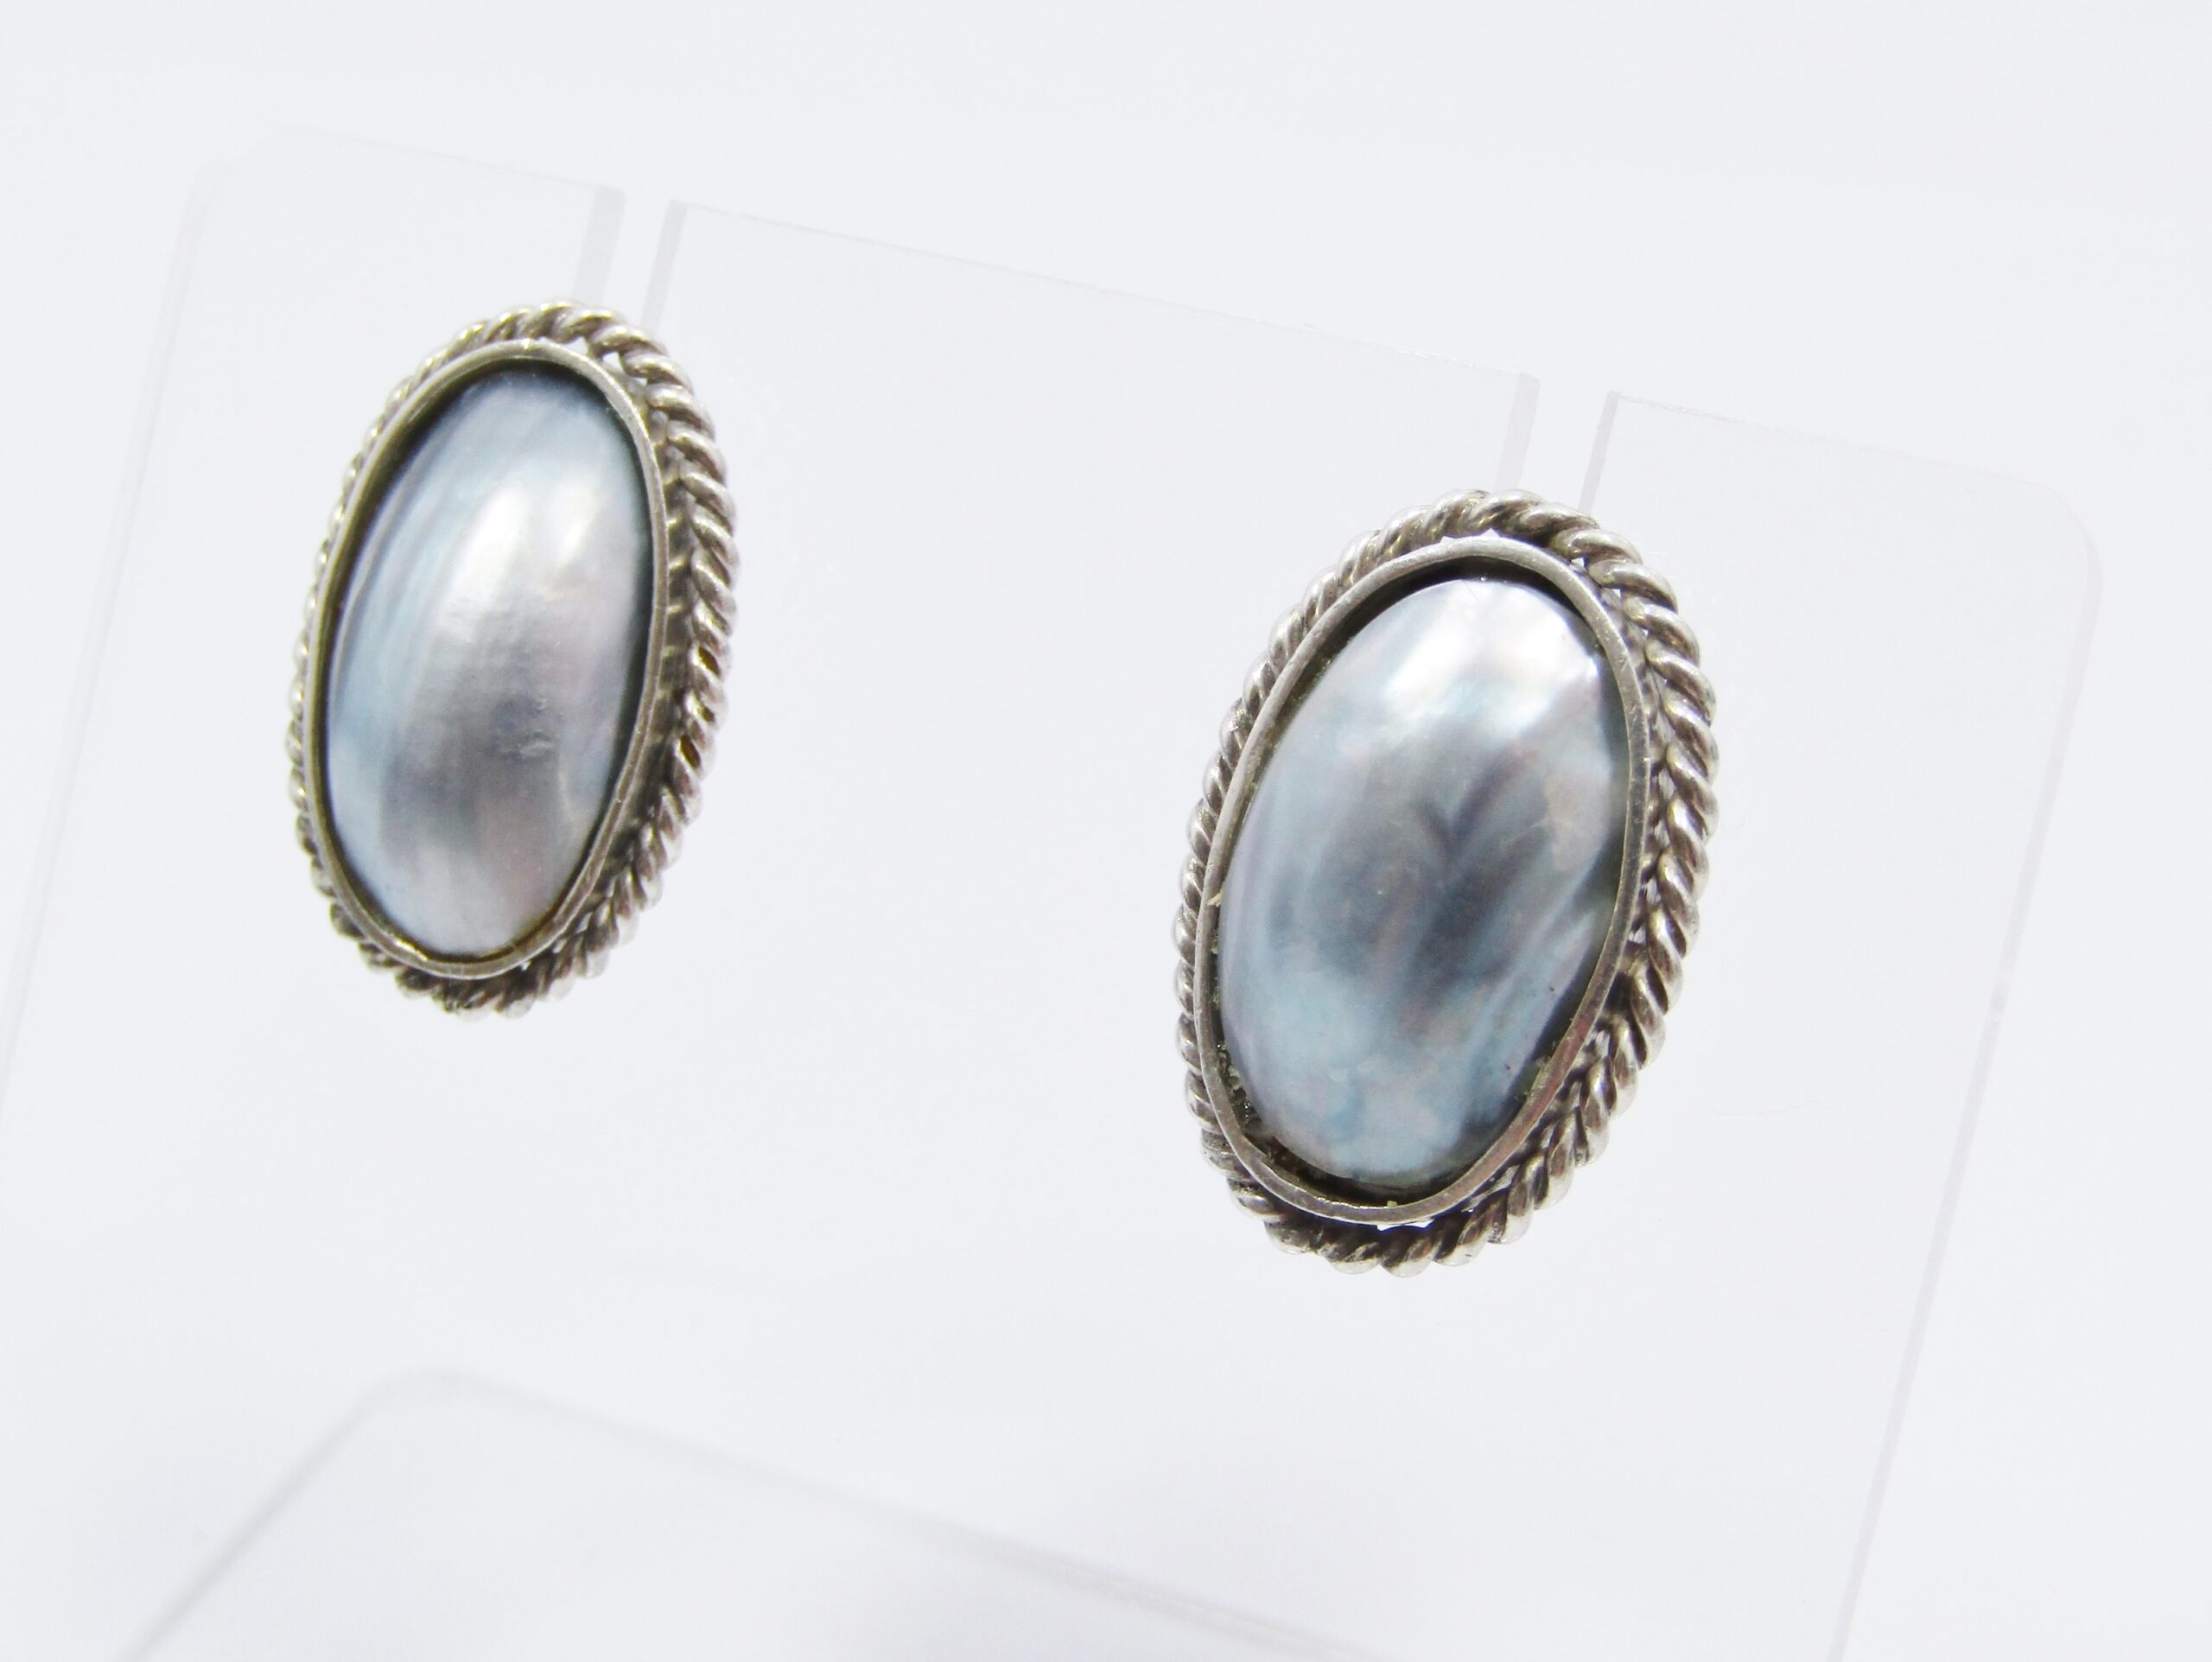 Gorgeous Pair of Oval Shell Earrings in Sterling Silver